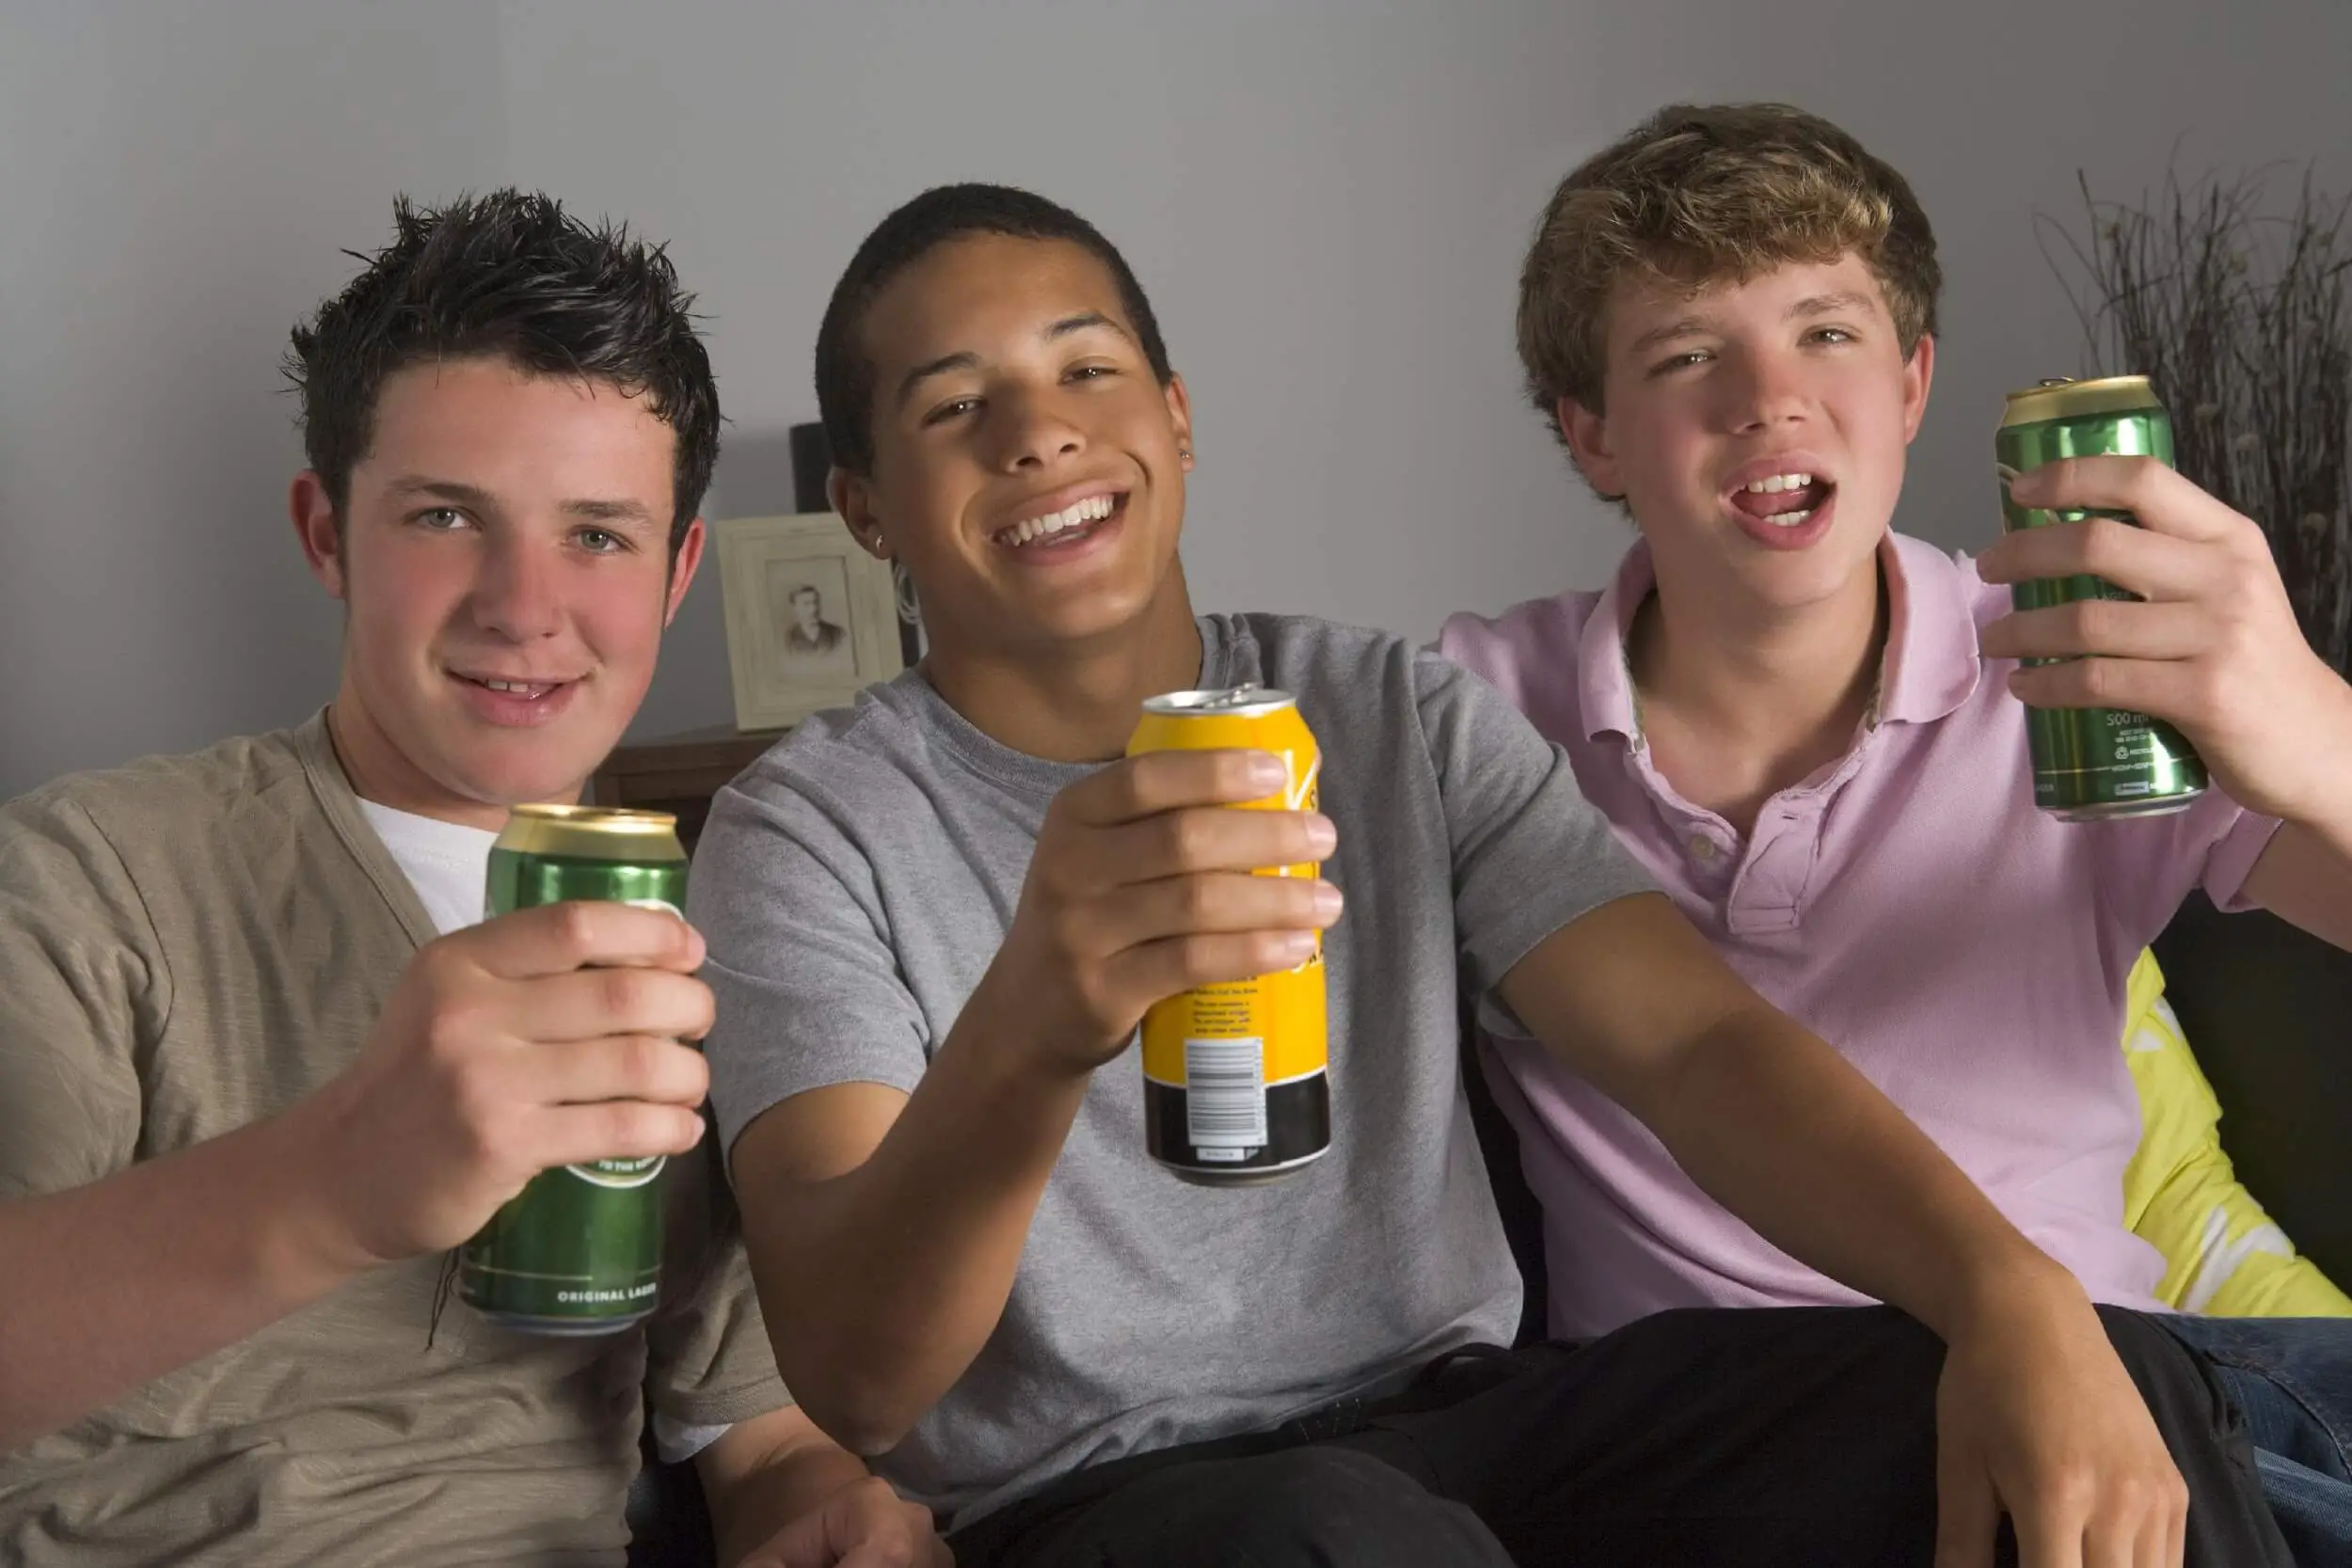 do drink Why alcohol teens